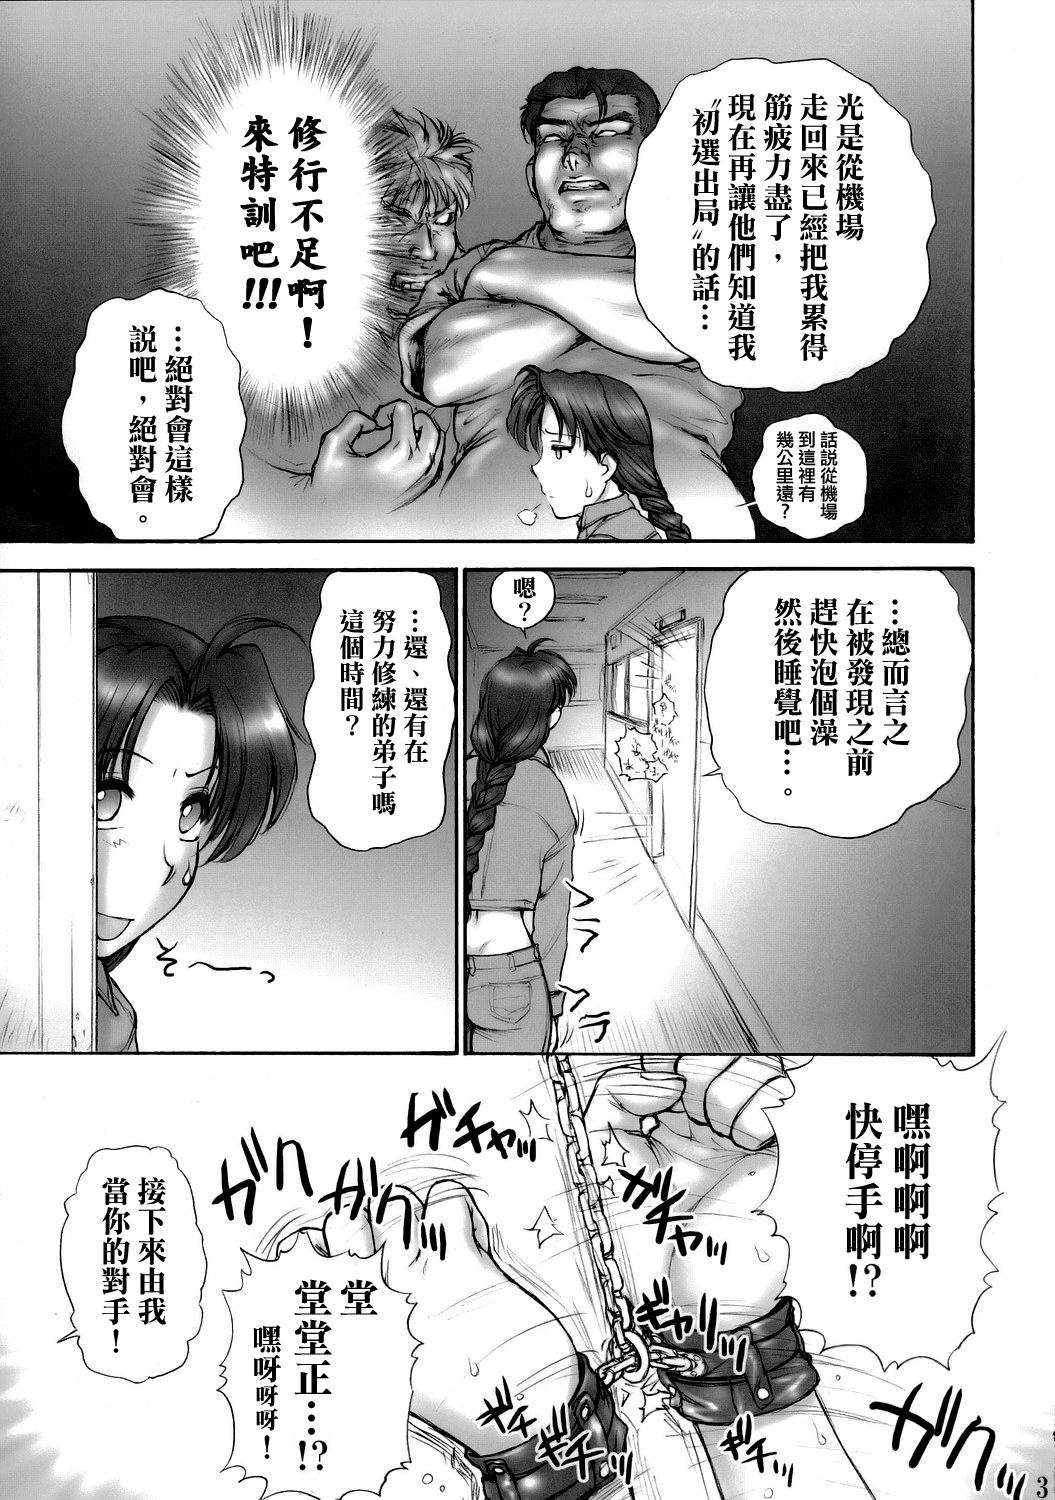 Gay Reality (SC29) [Shinnihon Pepsitou (St. Germain-sal)] Report Concerning Kyoku-gen-ryuu (The King of Fighters) [Chinese] [日祈漢化] - King of fighters Hermosa - Page 5